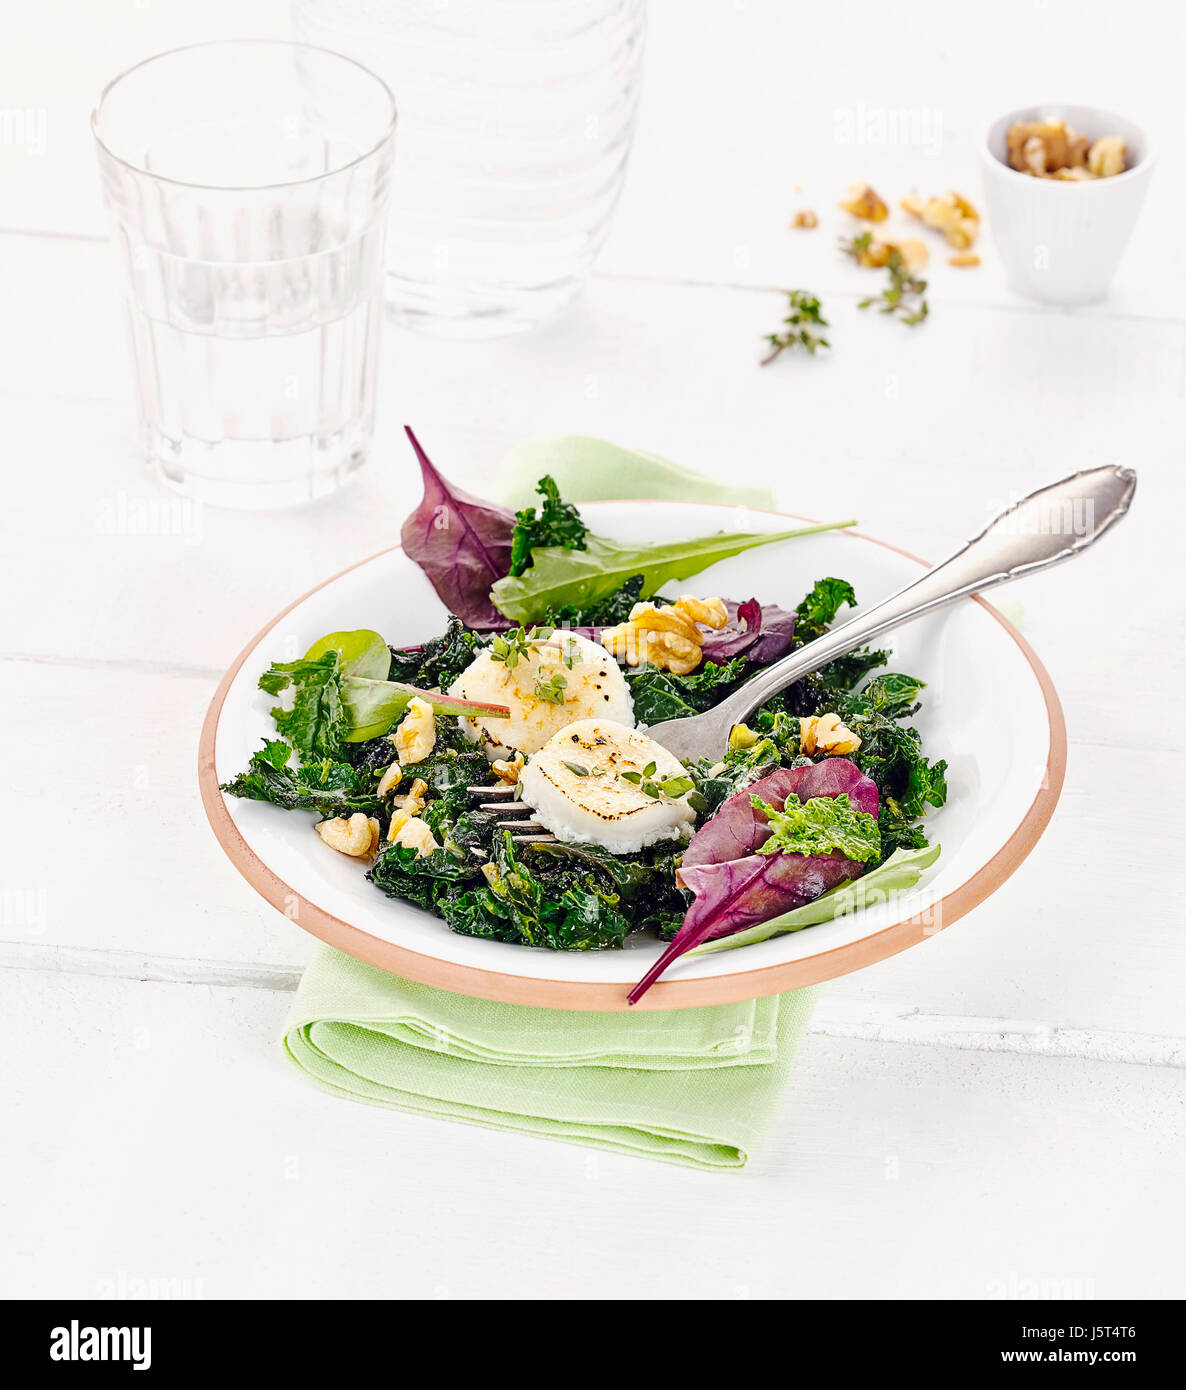 Kale salad with gratinated goat cheese Stock Photo